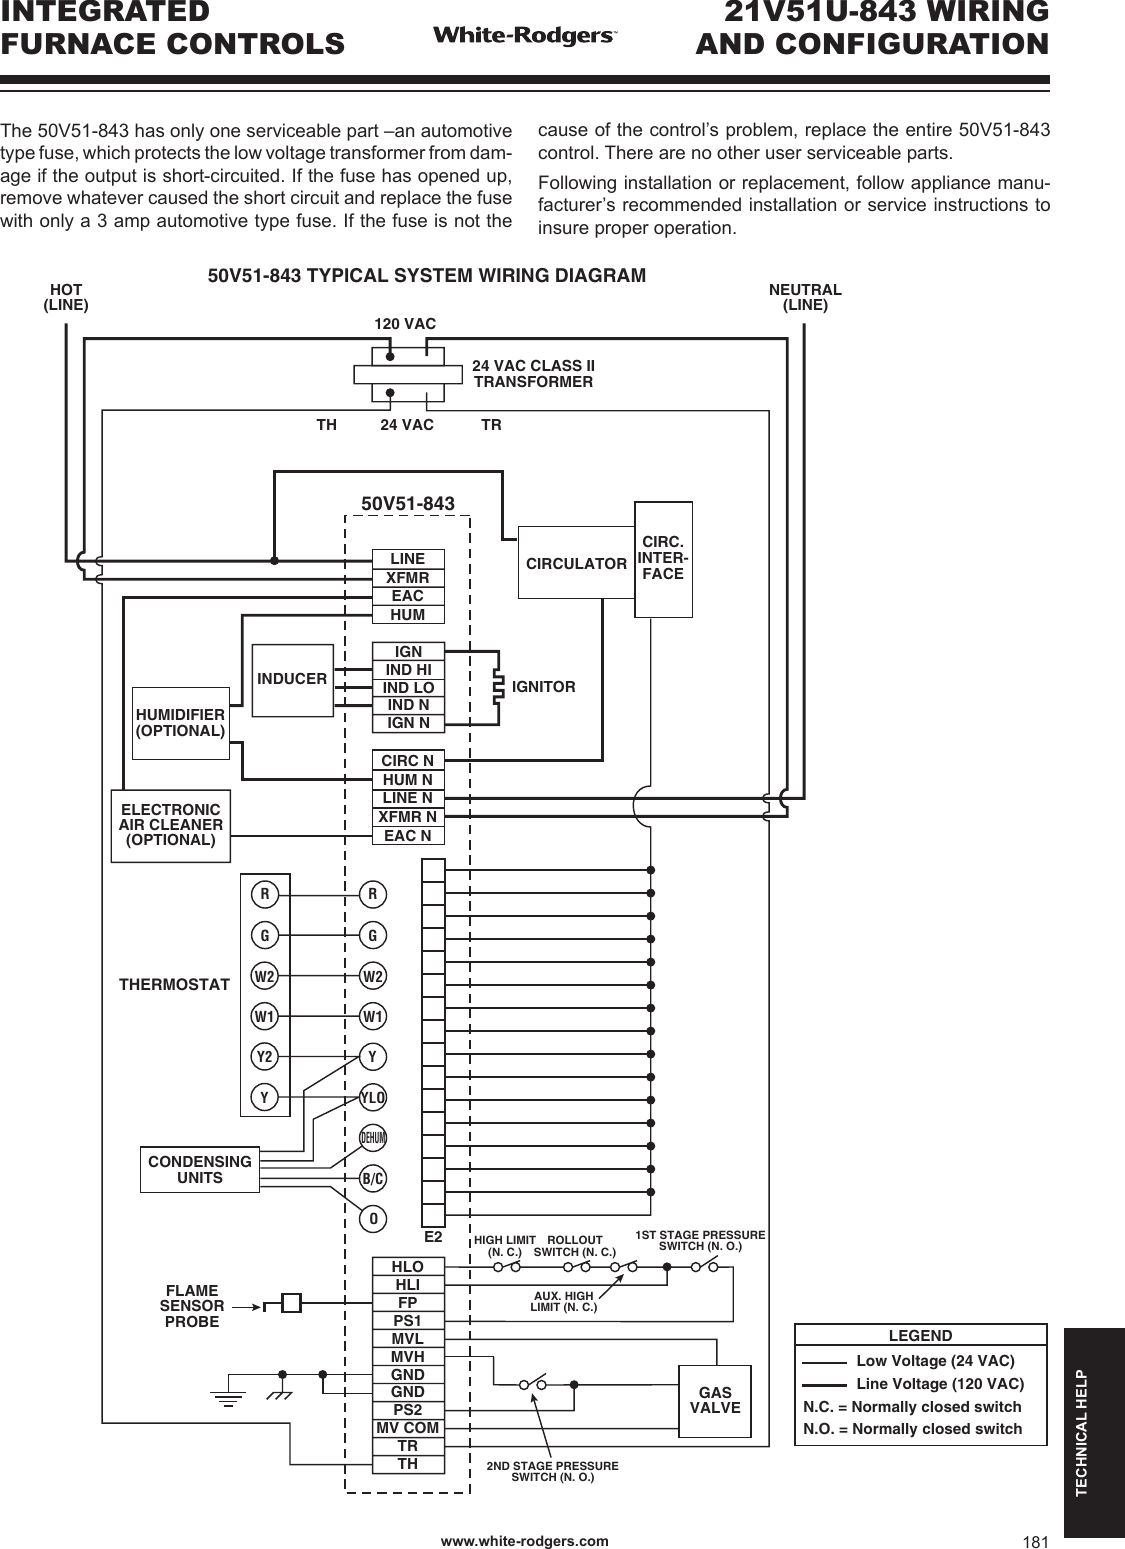 Page 1 of 2 - White-Rodgers White-Rodgers-21V51U-843-Universal-Two-Stage-Hsi-Integrated-Furnace-Control-Kit-Wiring-Diagram- 81 Of White-Rodgers_catalog_R-4425_  White-rodgers-21v51u-843-universal-two-stage-hsi-integrated-furnace-control-kit-wiring-diagram